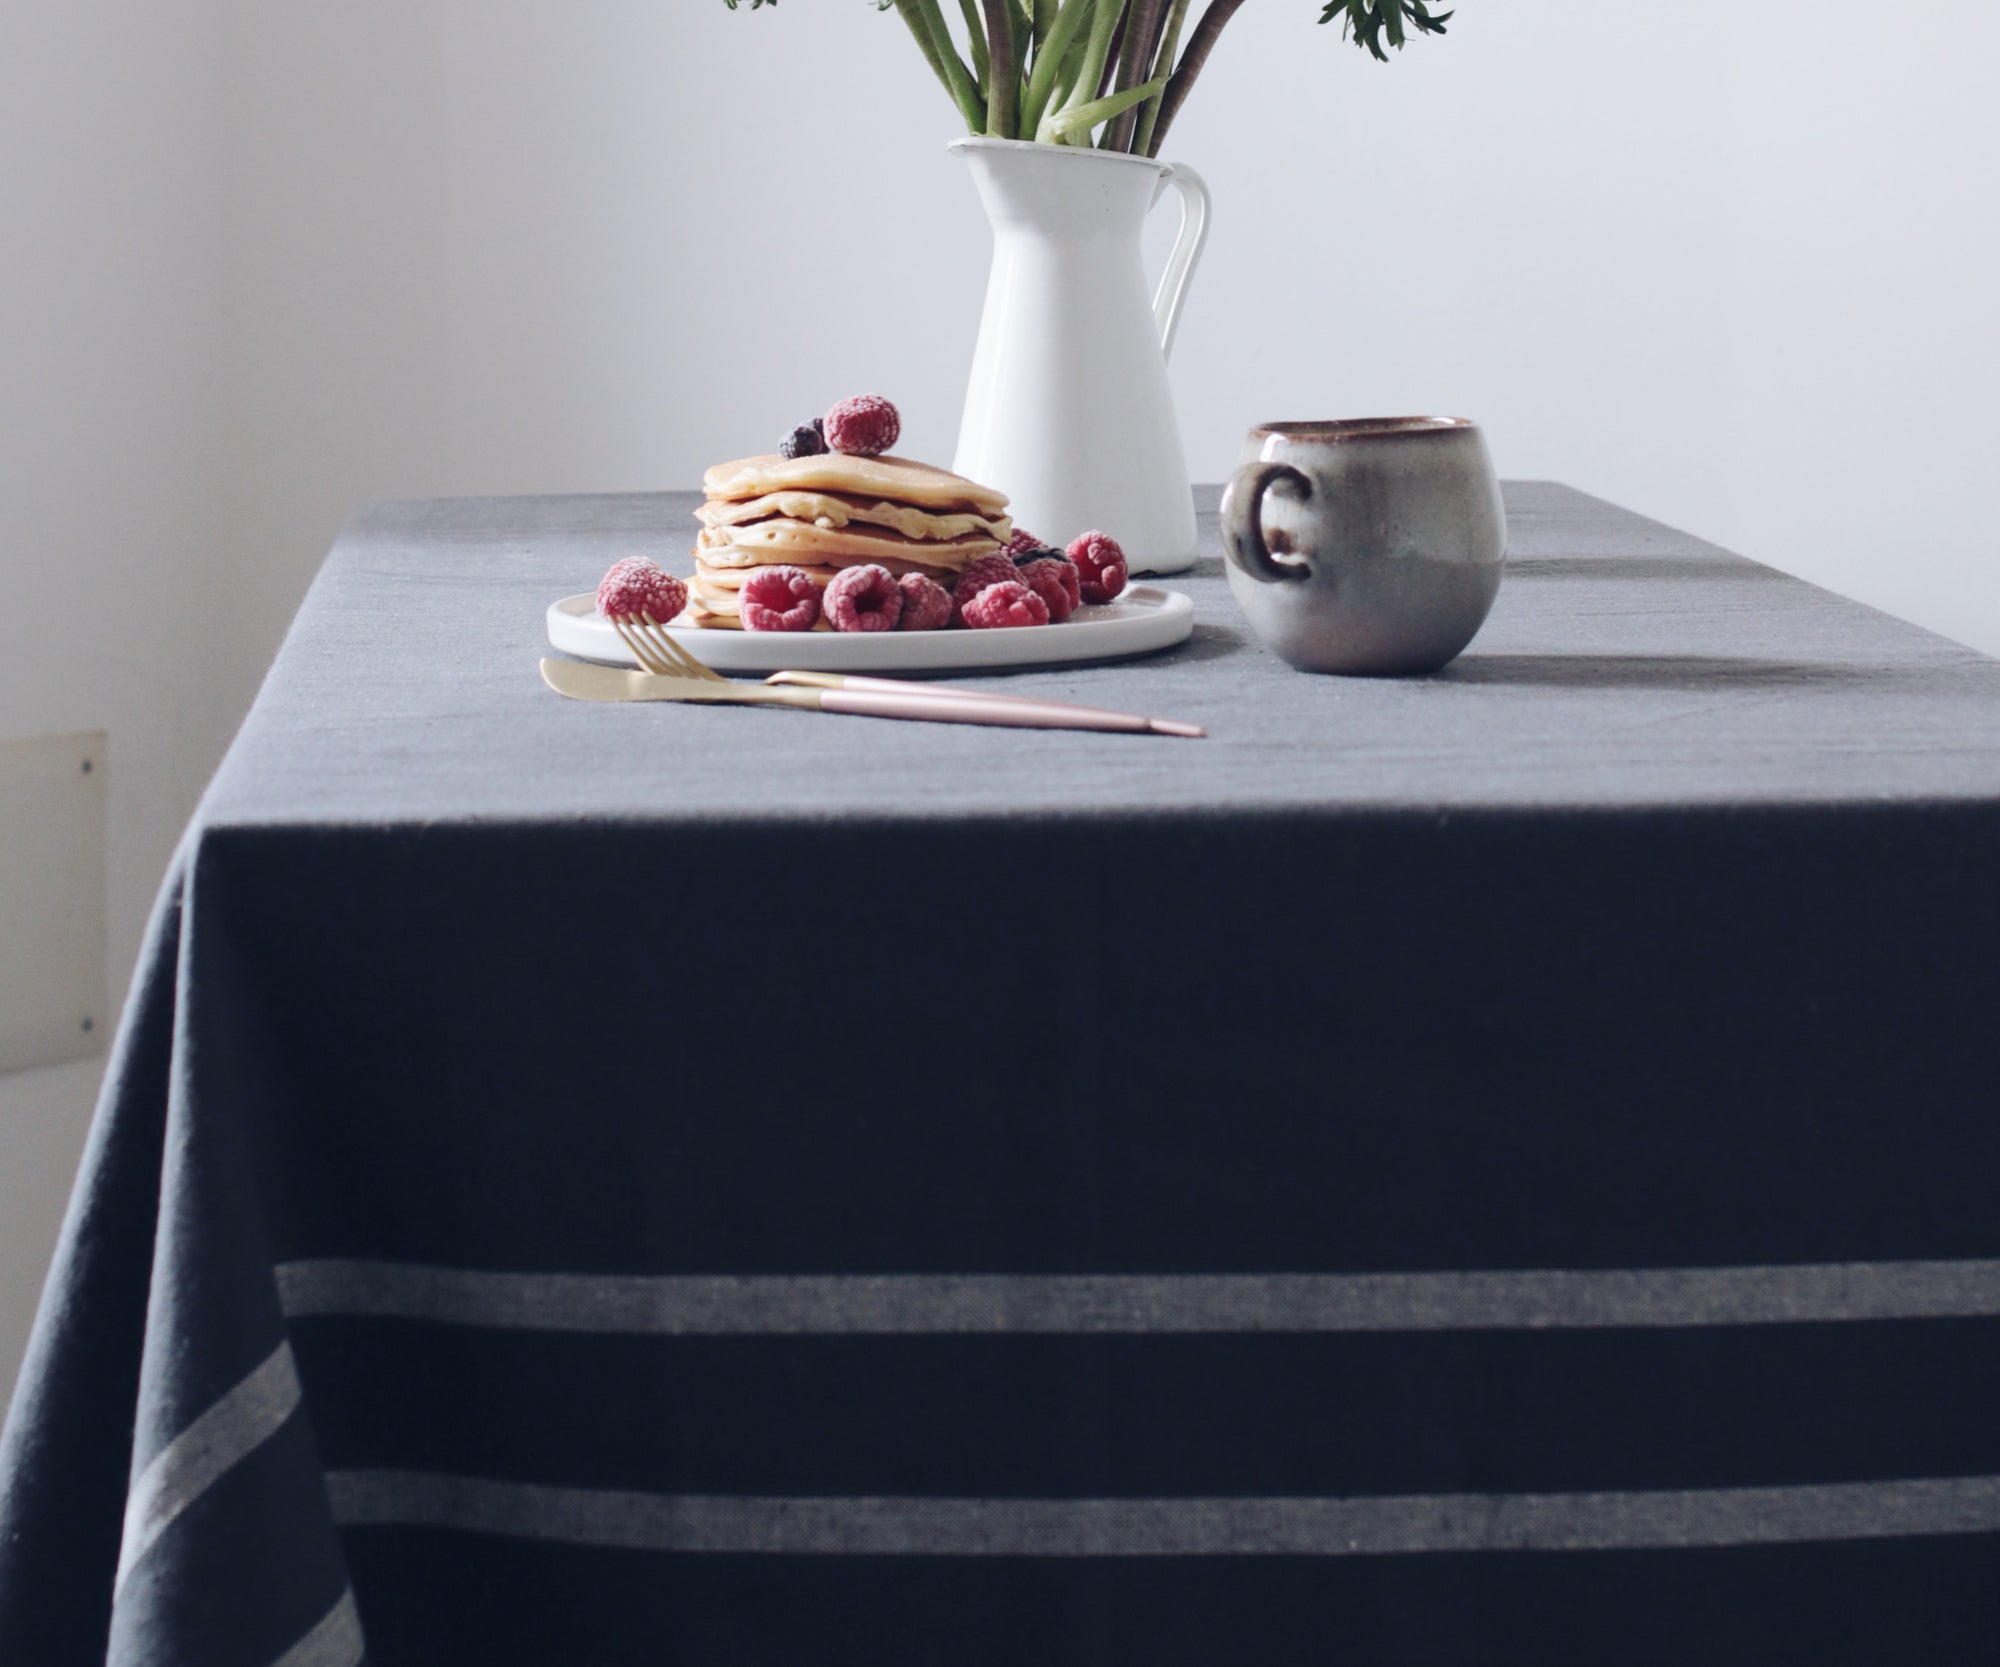 10 Clever Ideas to Upcycle Old Tablecloths